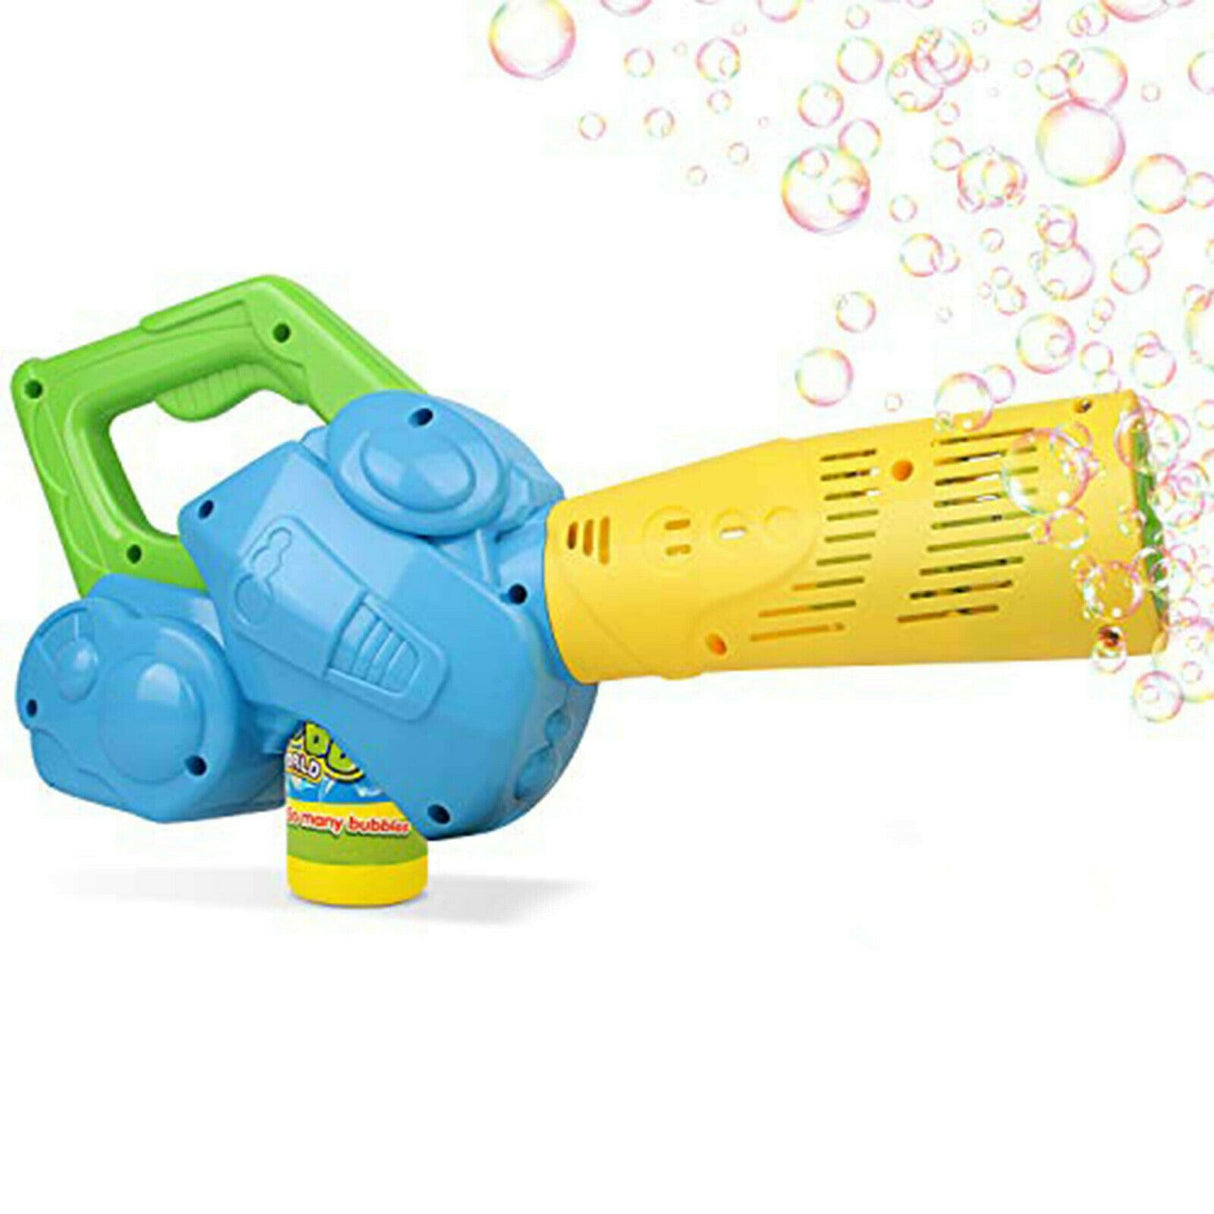 Bubble Leaf Blowing Gun for Kids by The Magic Toy Shop - UKBuyZone